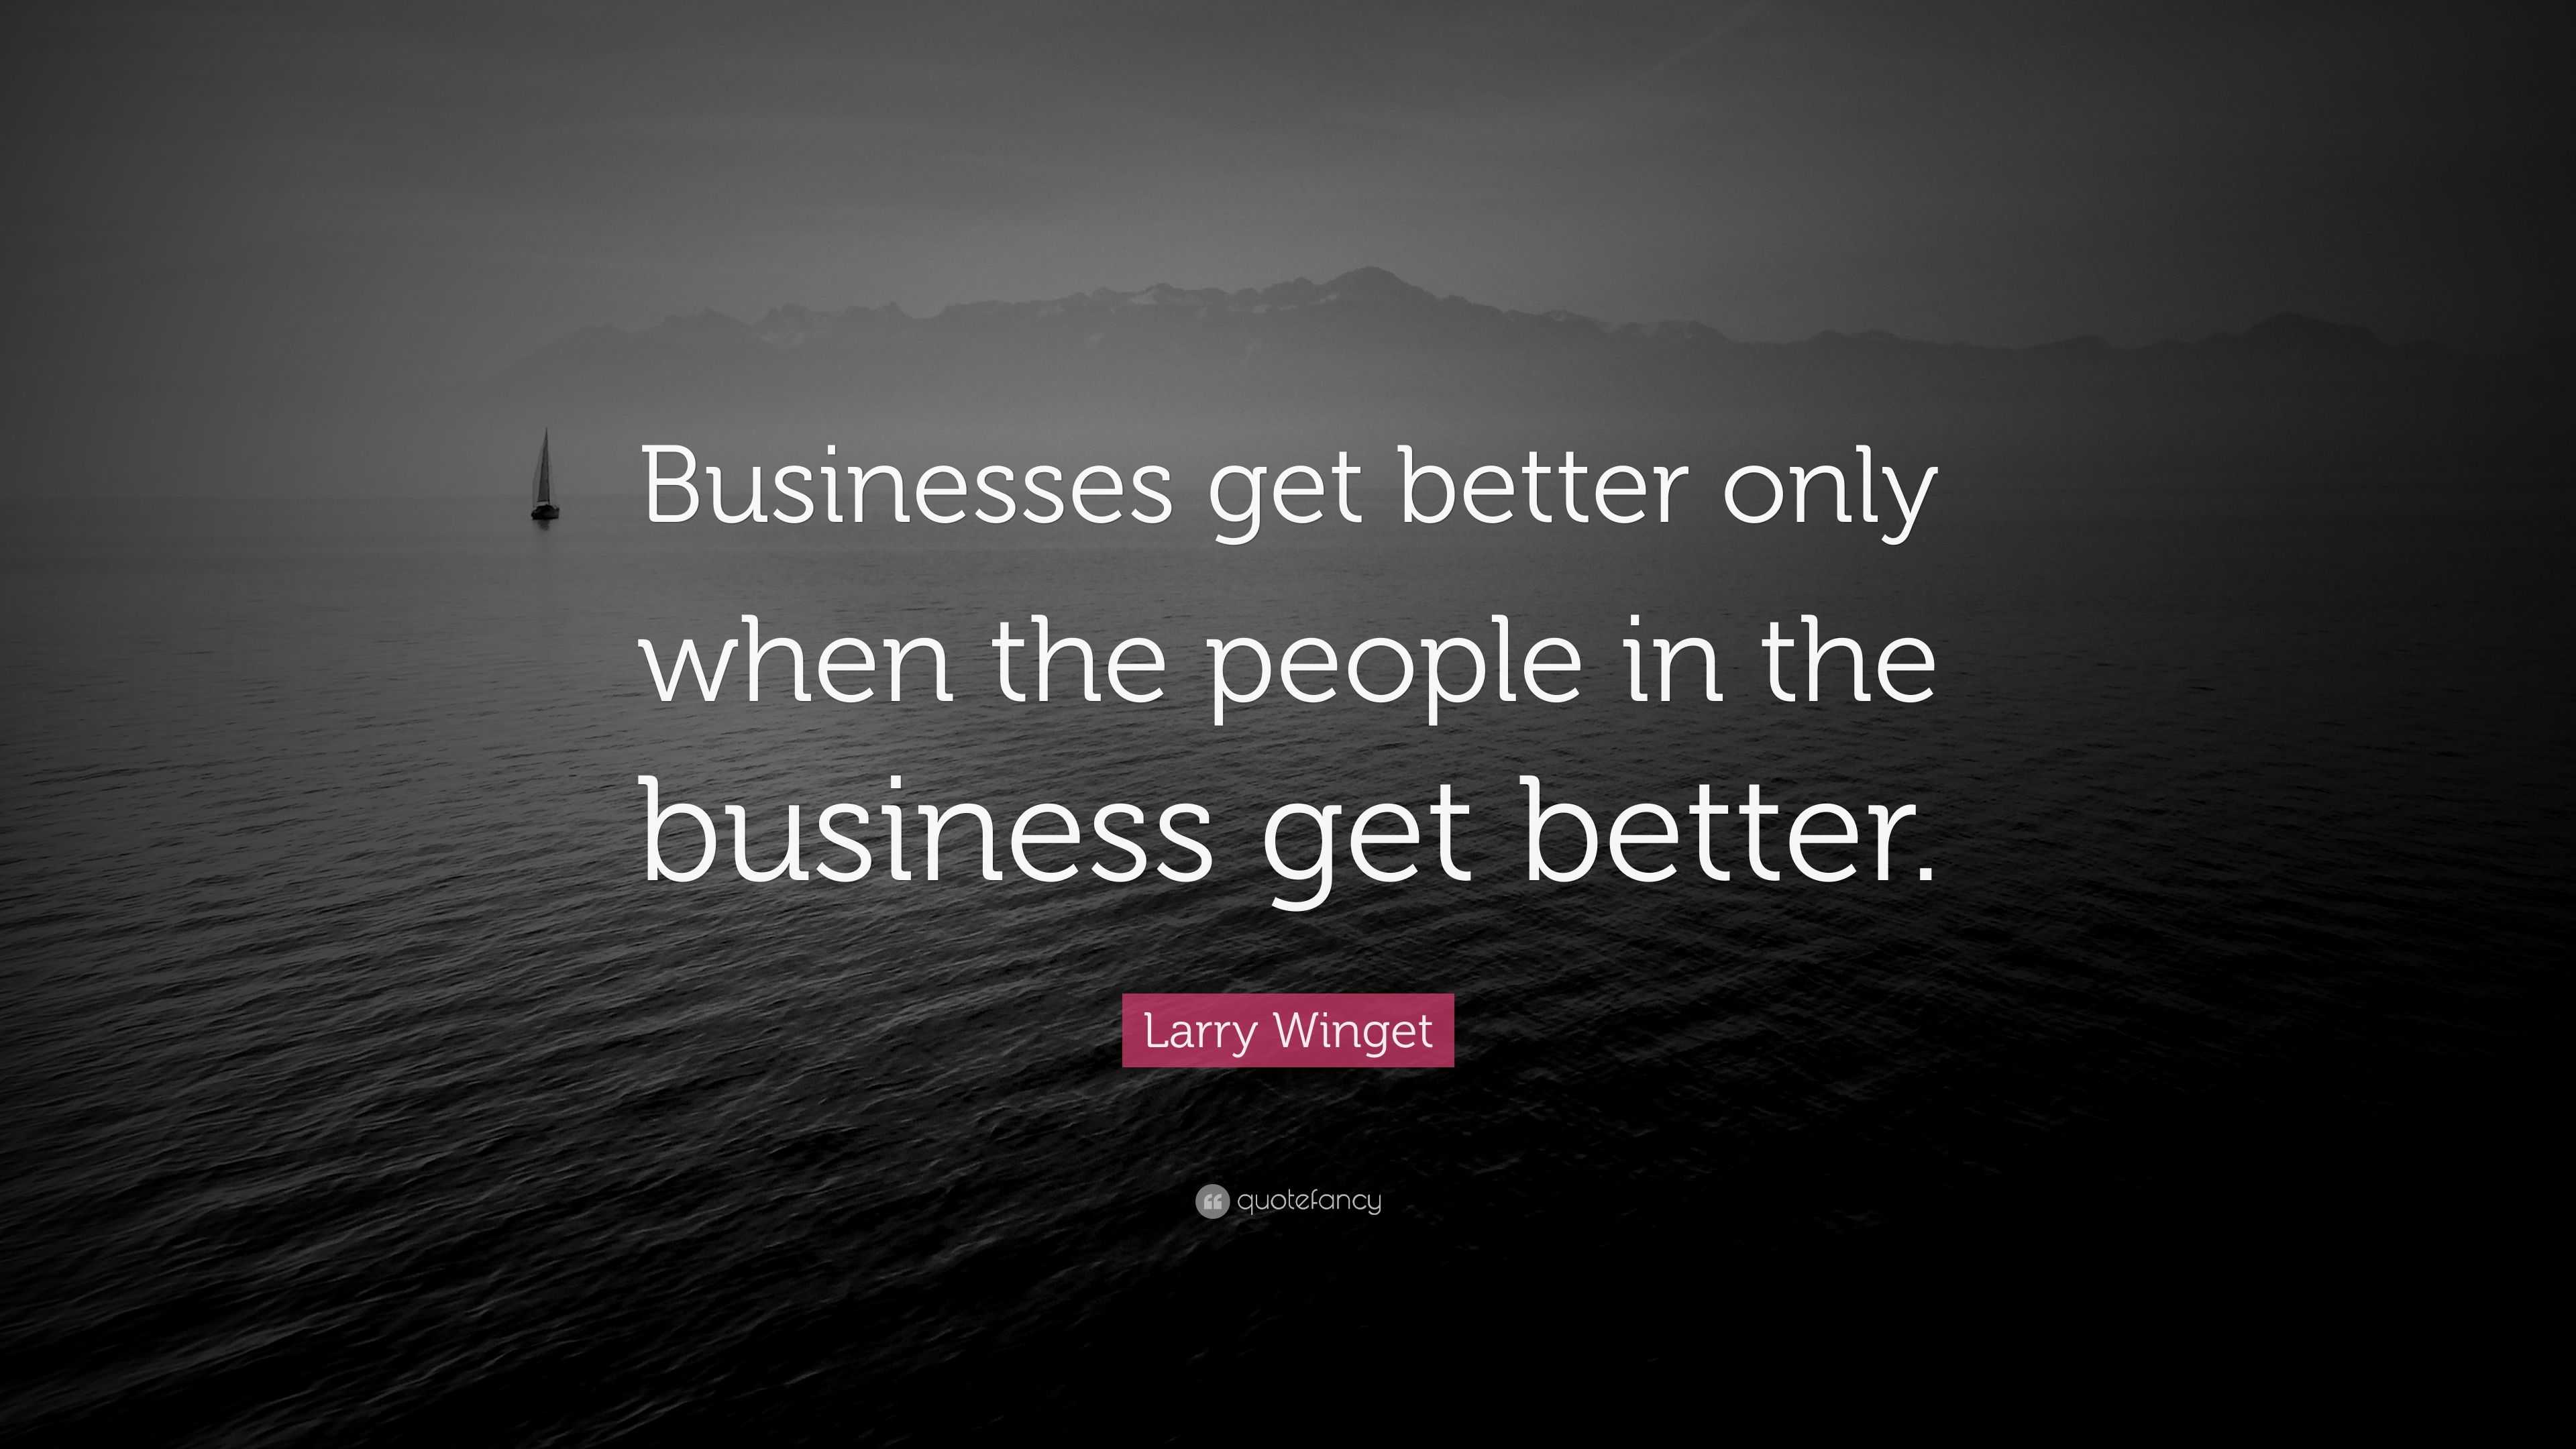 Larry Winget Quote “businesses Get Better Only When The People In The